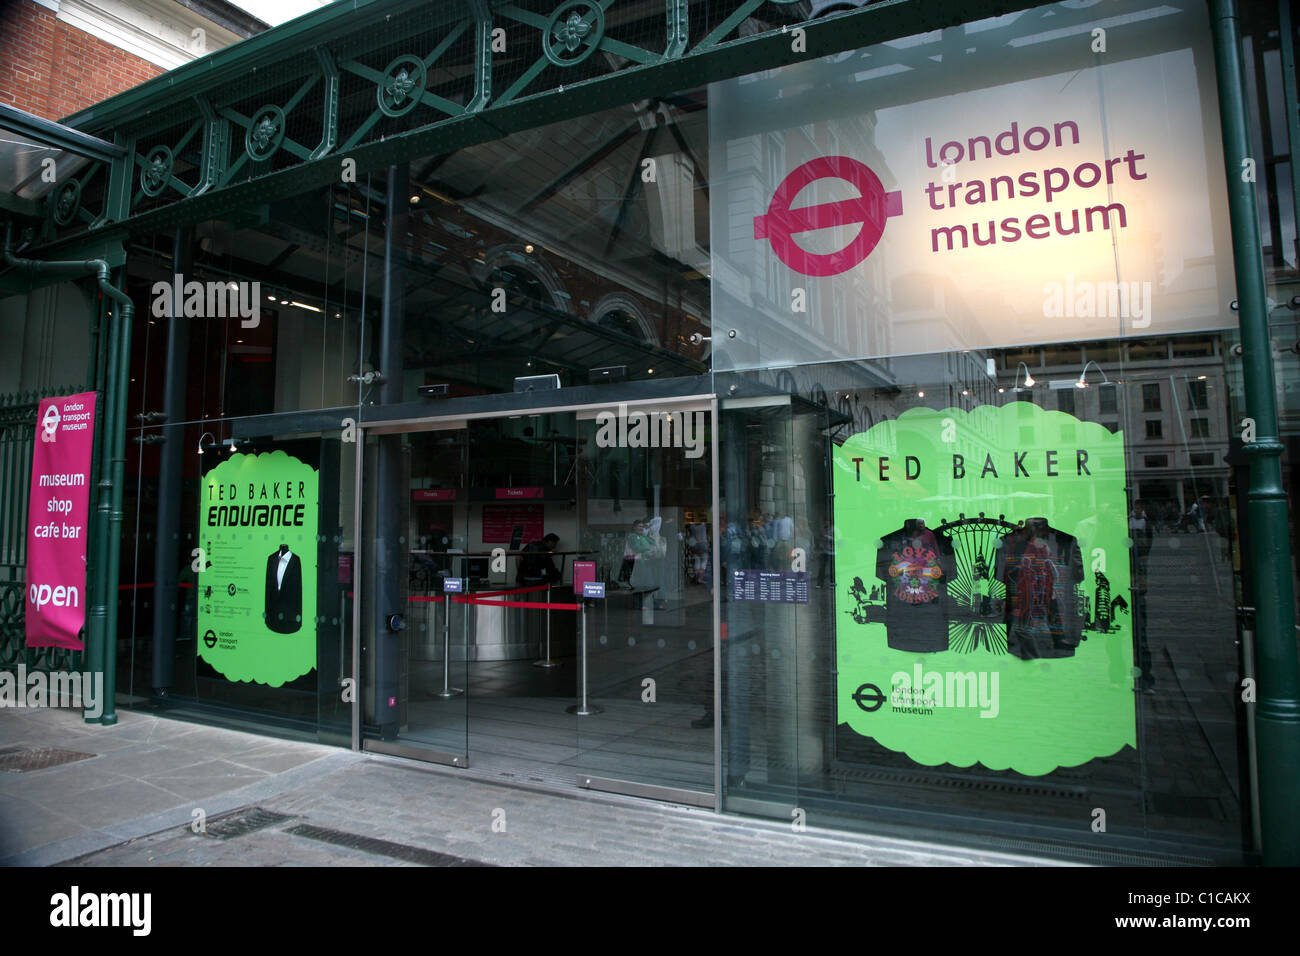 General View gv of the London Transport Museum in Covent Garden, London, England. Stock Photo